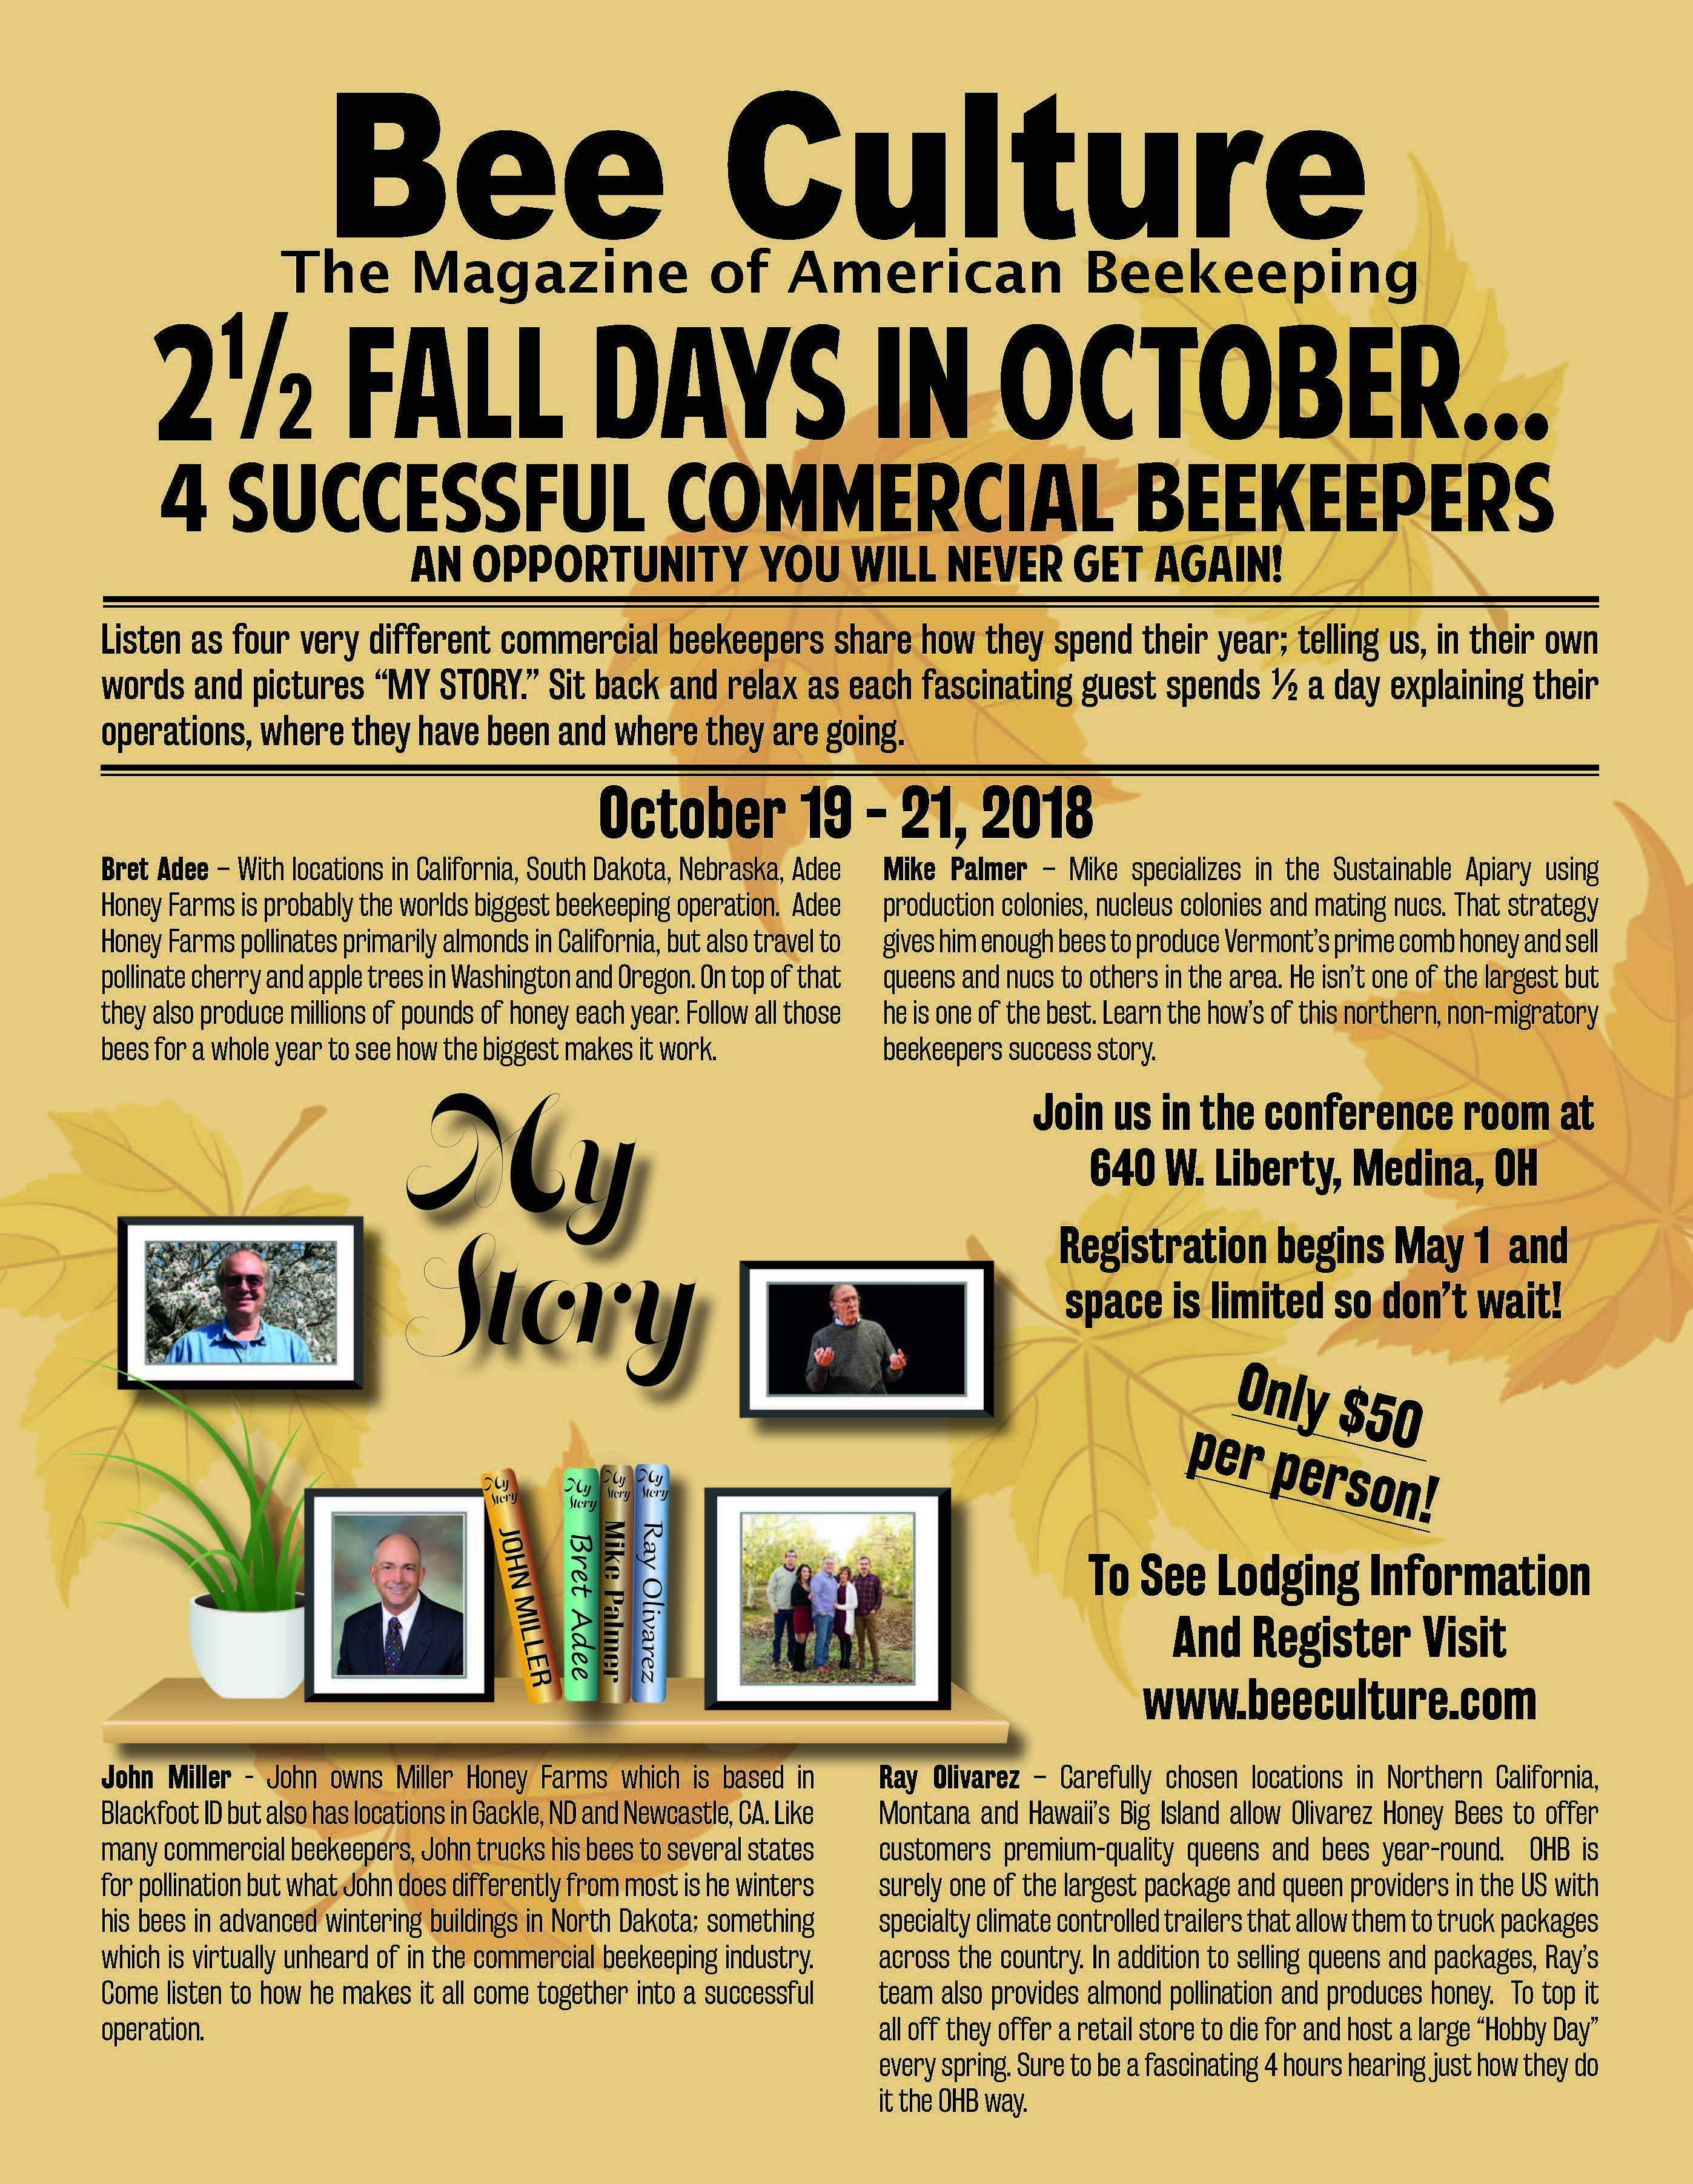 Bee Culture’s Fall Event – “My Story” – October 2018